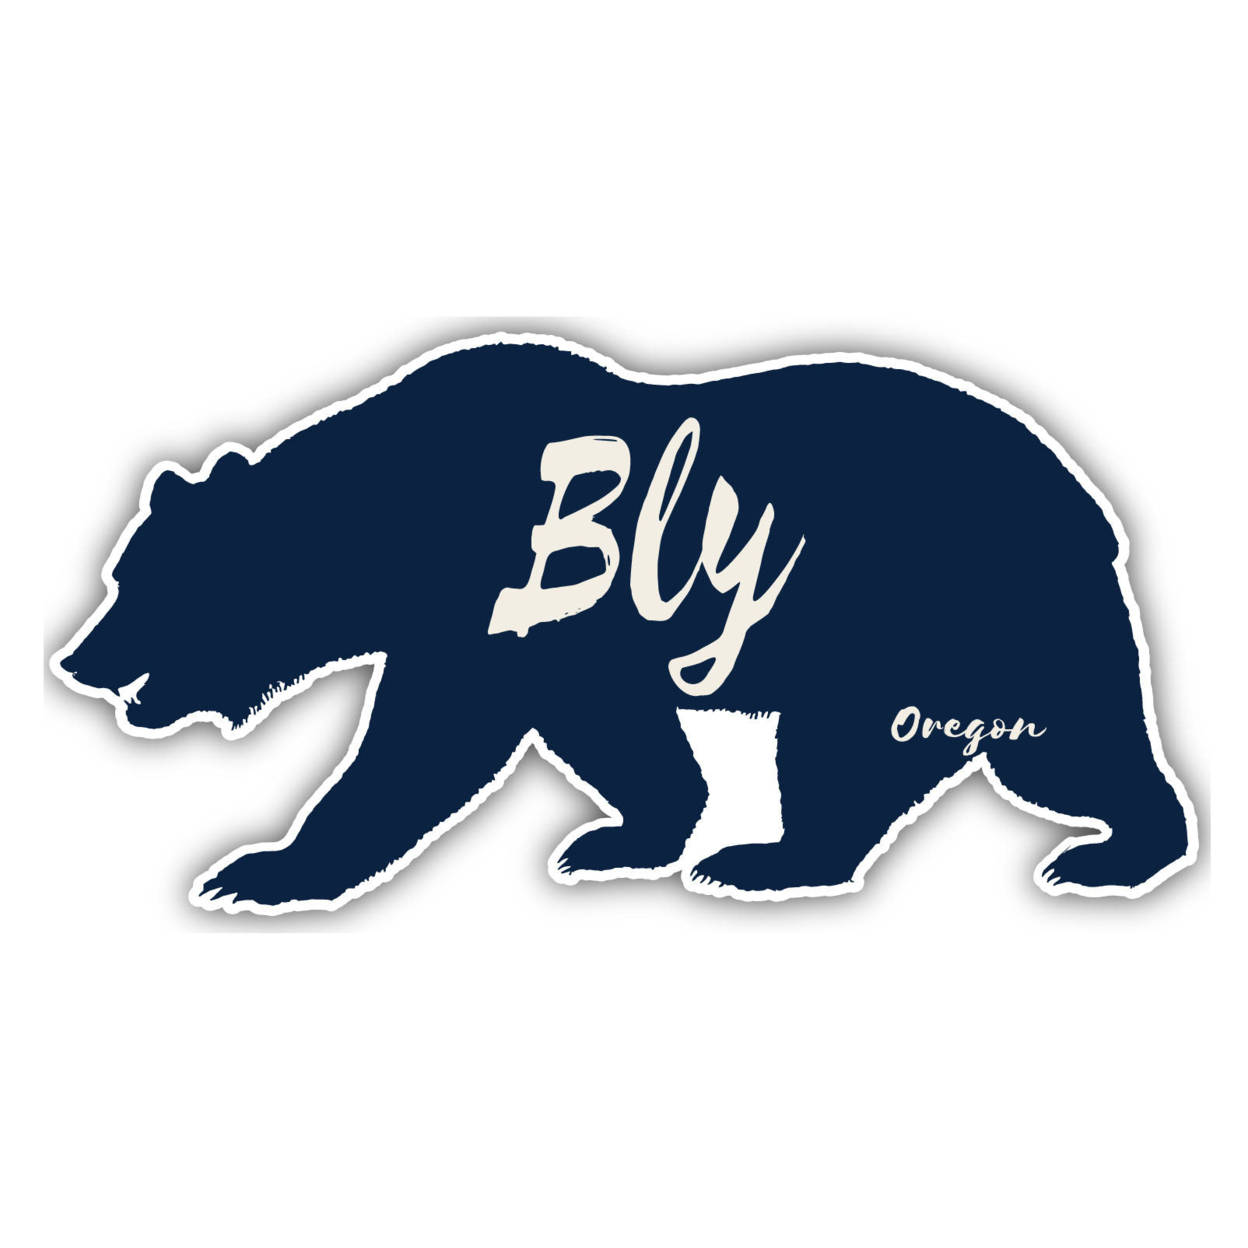 Bly Oregon Souvenir Decorative Stickers (Choose Theme And Size) - 4-Pack, 4-Inch, Great Outdoors